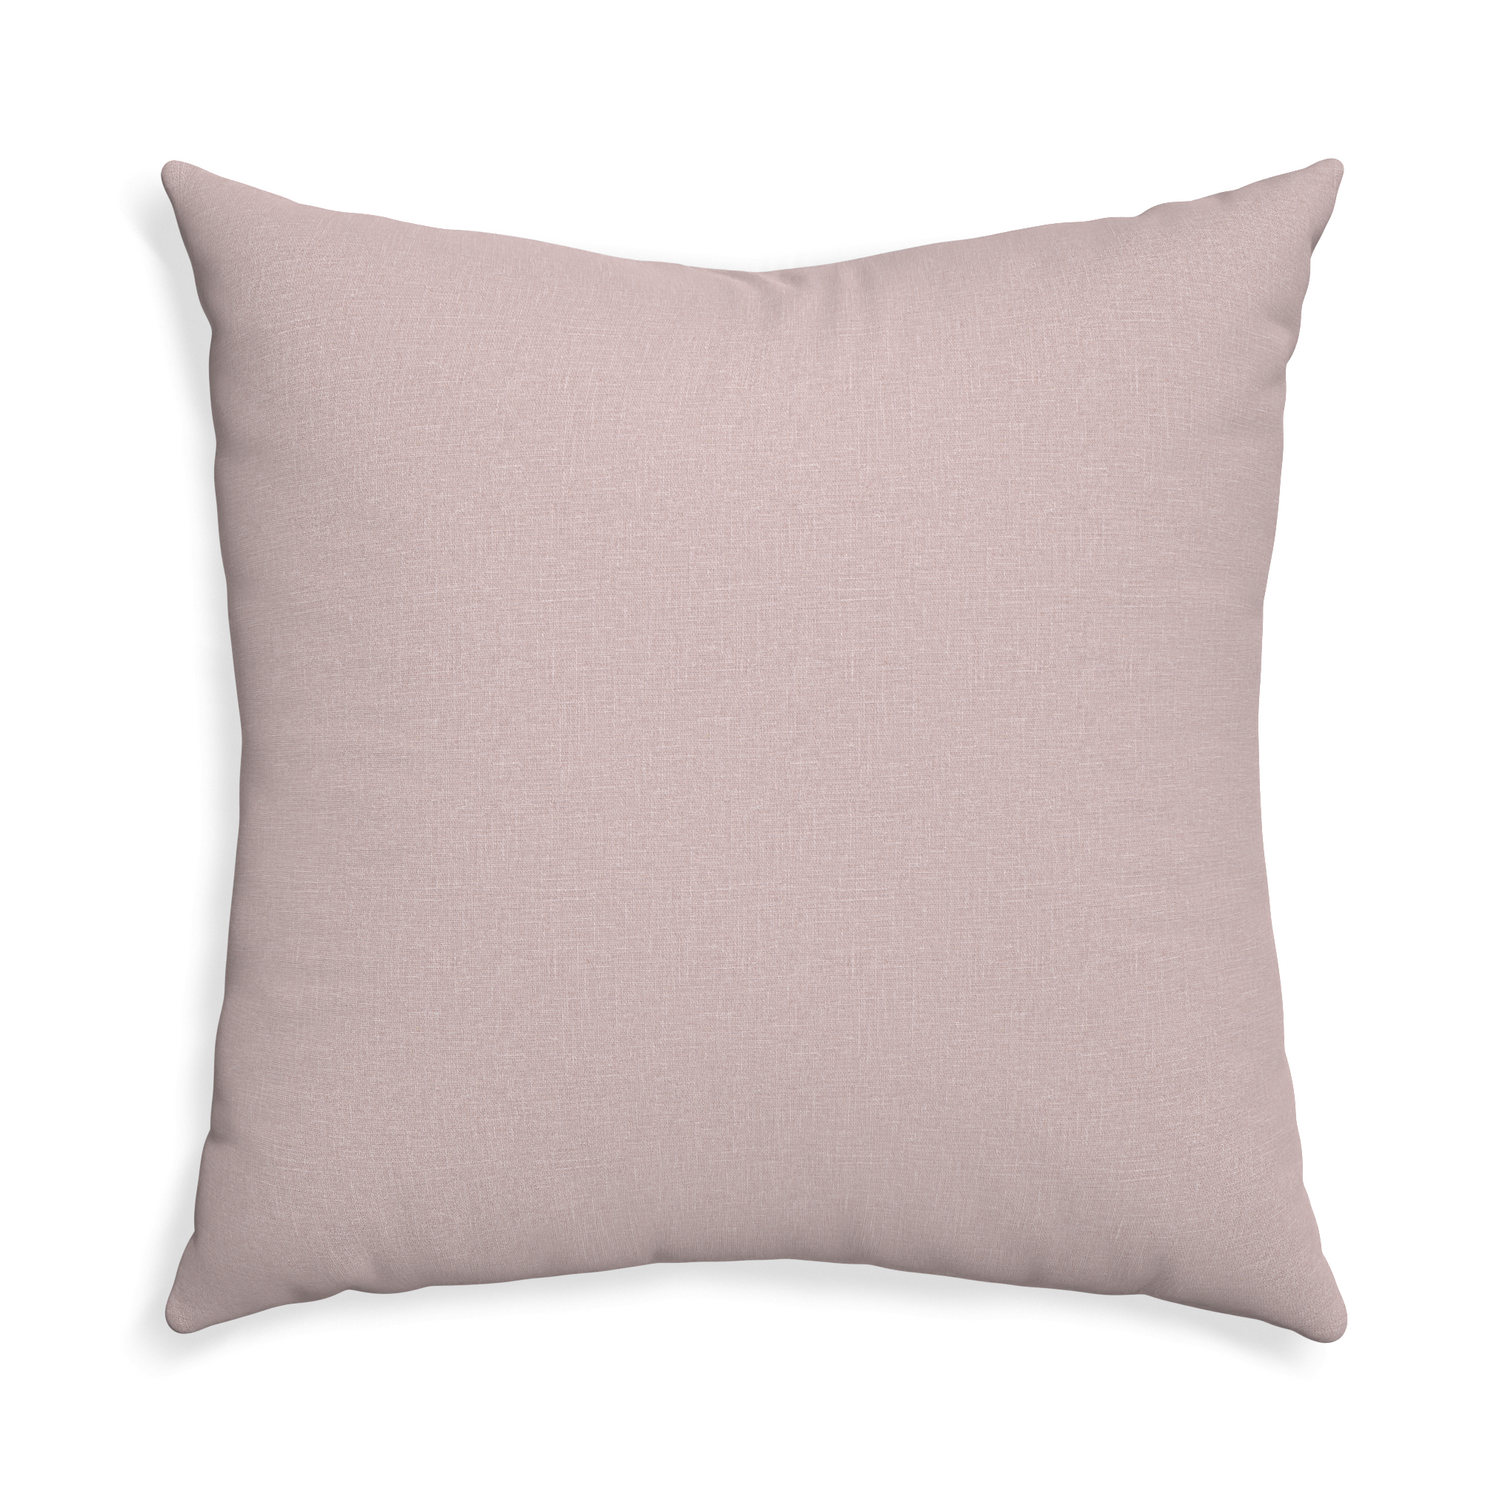 Euro-sham orchid custom mauve pinkpillow with none on white background